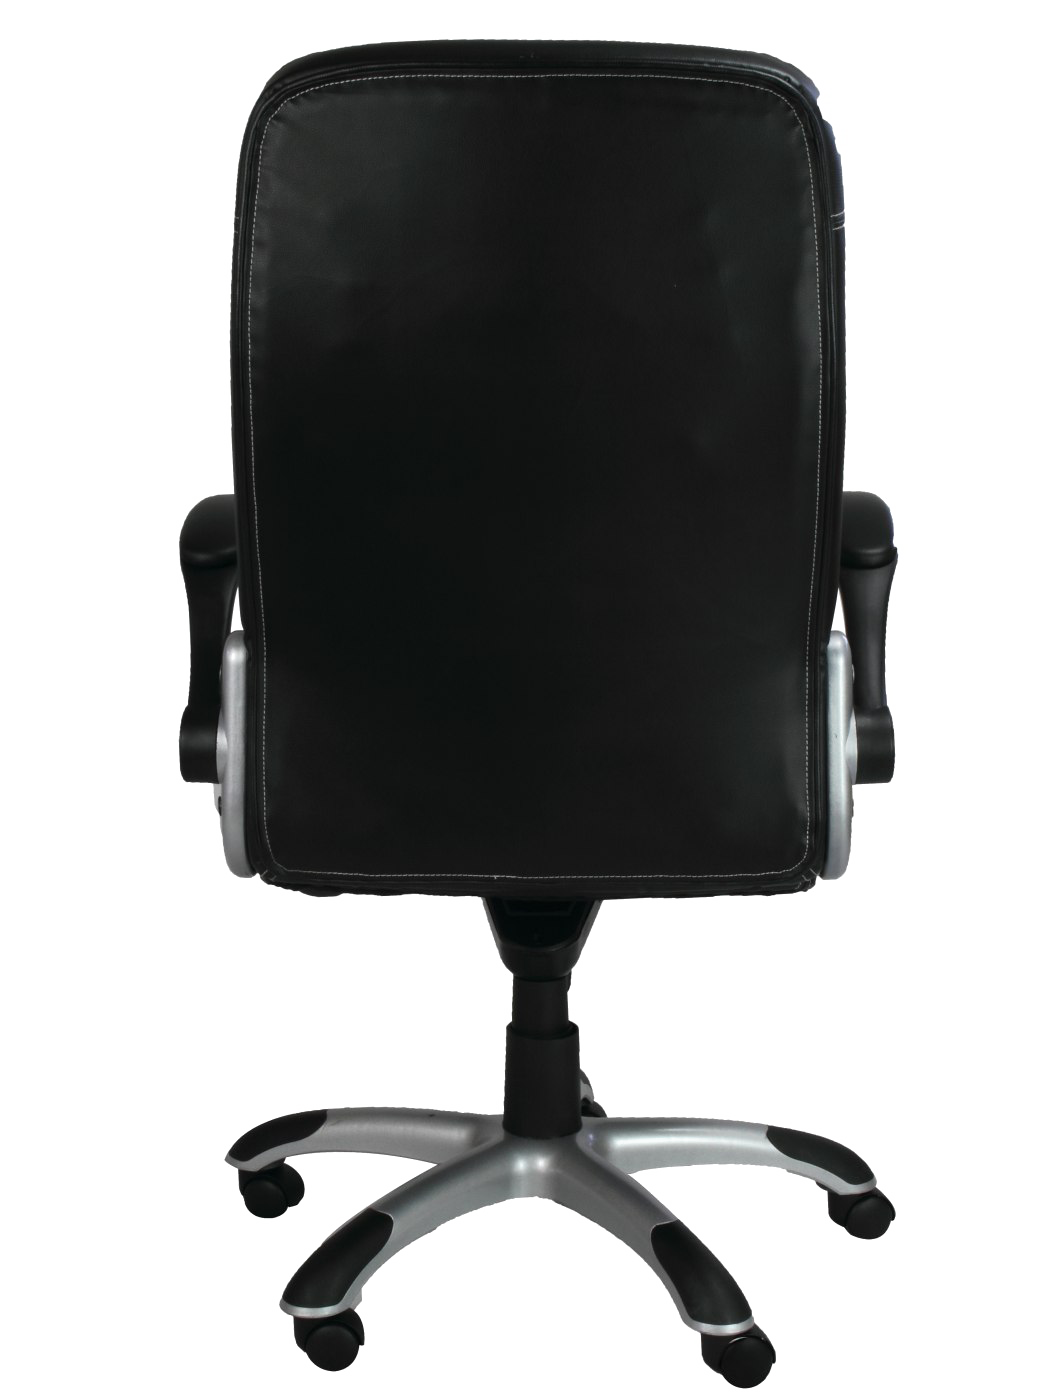 Desk Chair Free Download Image PNG Image